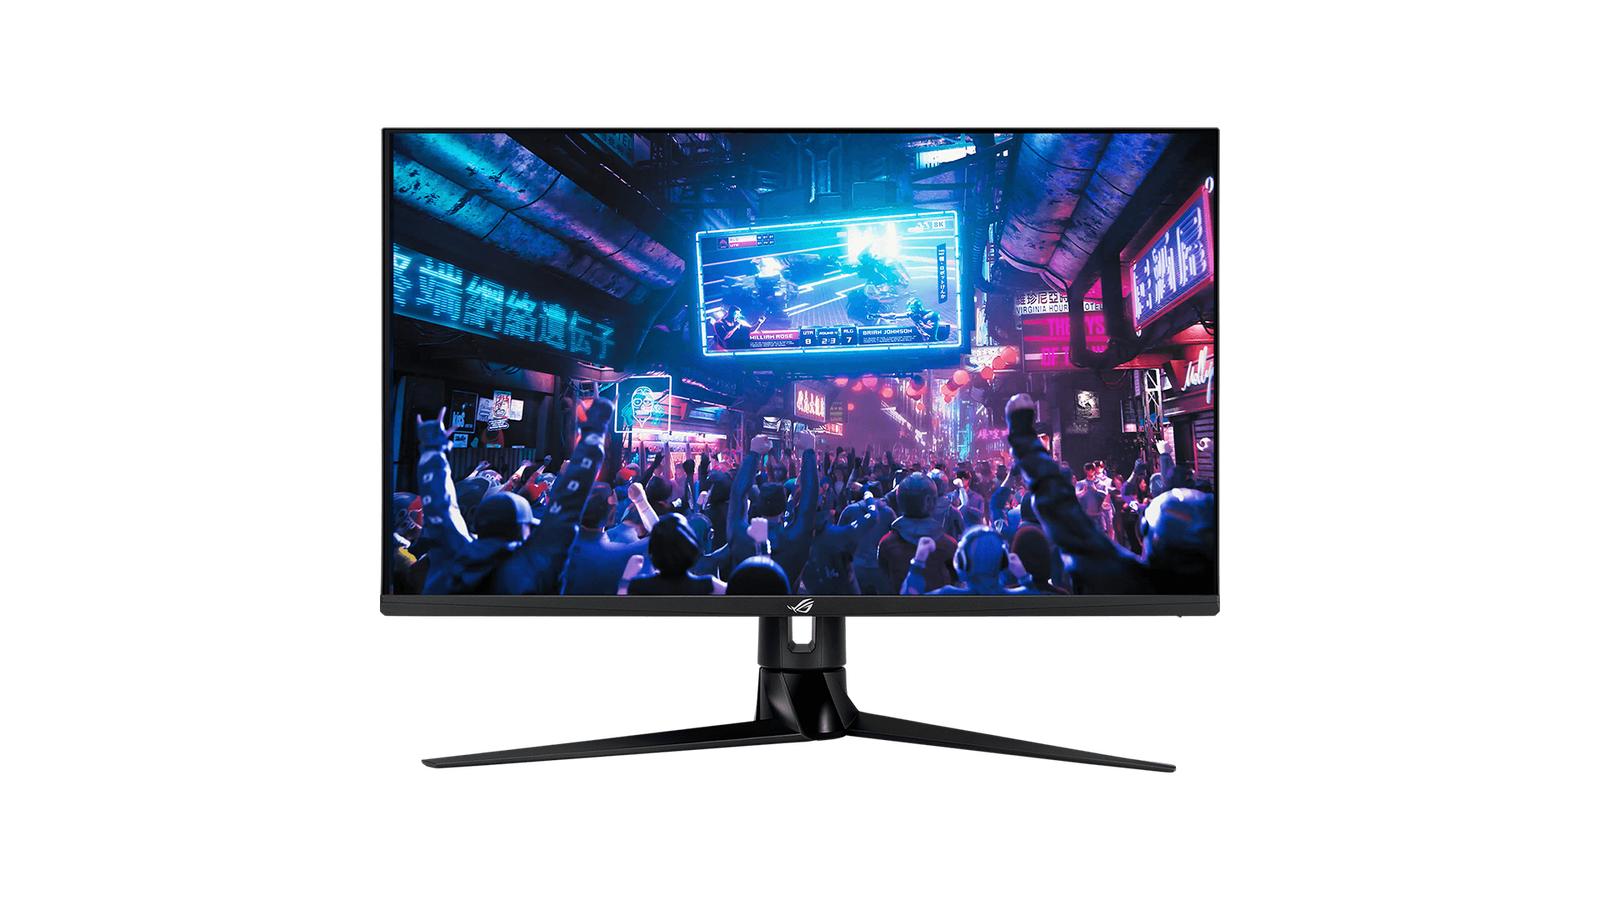 Asus ROG Swift PG32UQX - The best resolution gaming monitor.